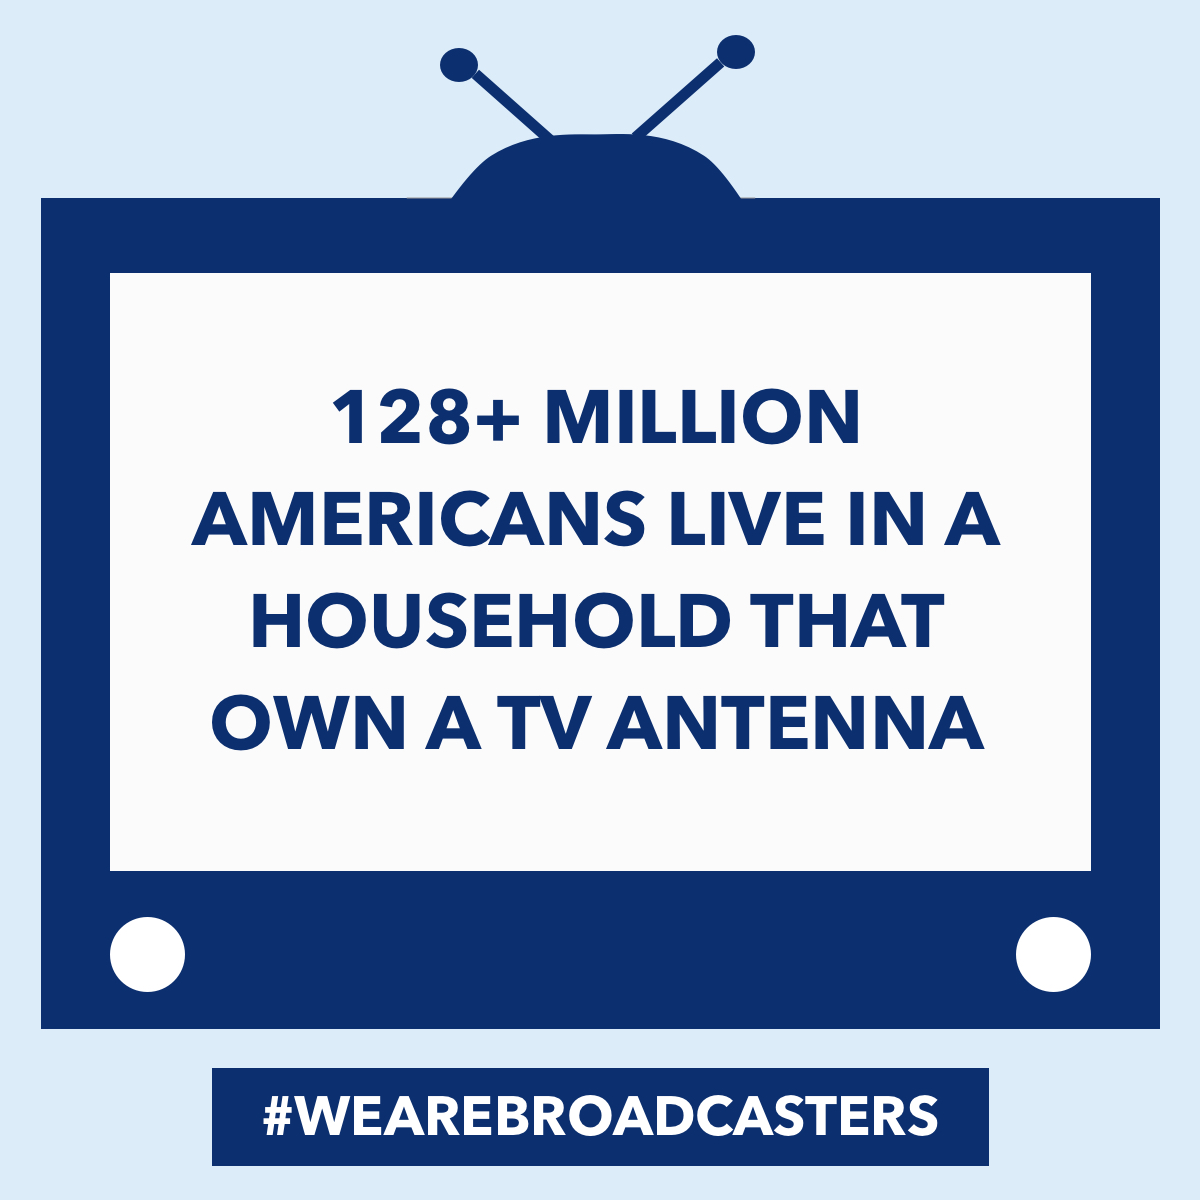 More than 72 million Americans rely exclusively on free broadcast television